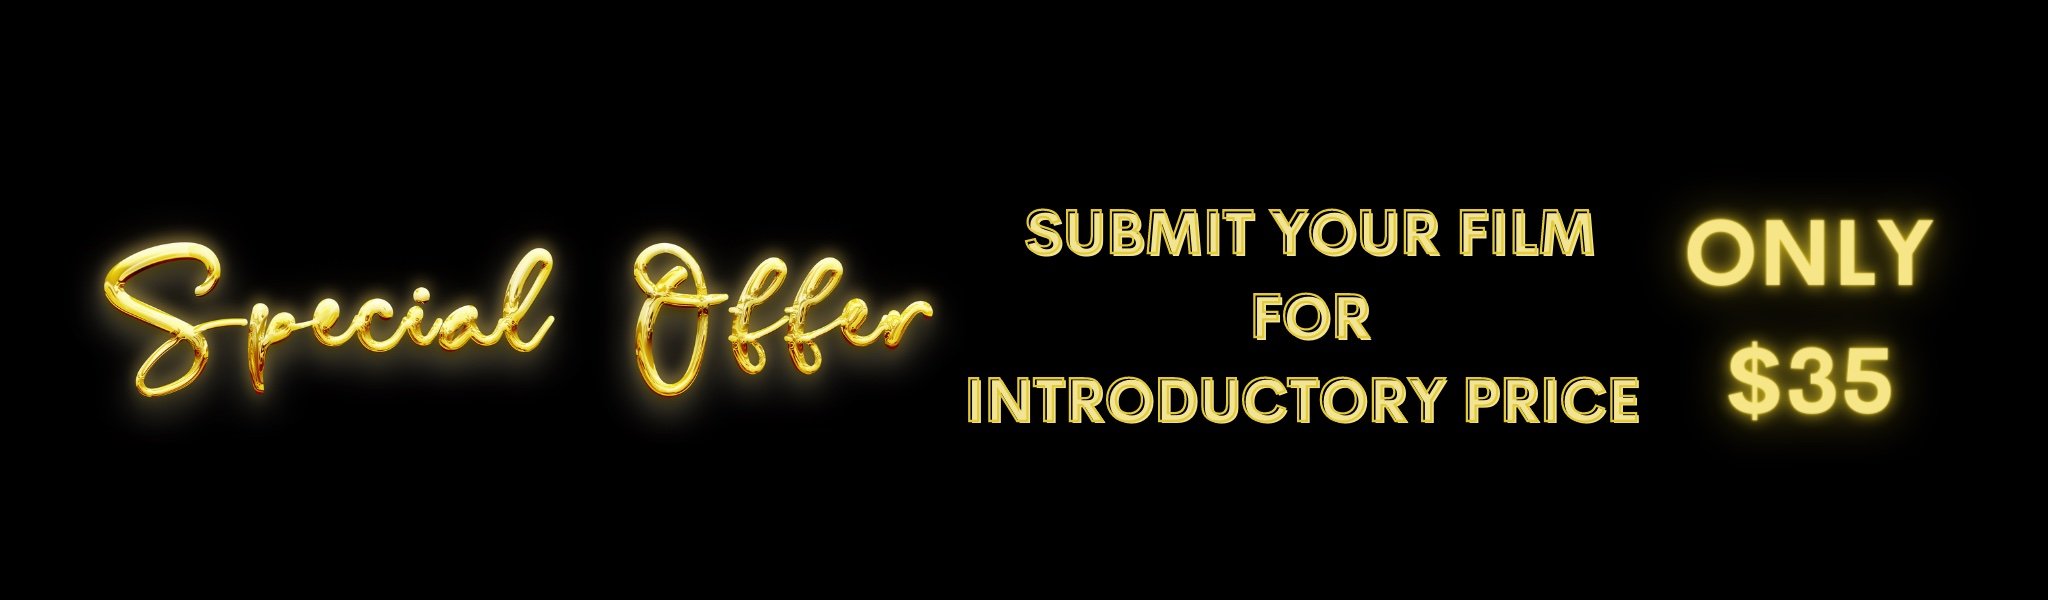 SUBMIT YOUR FILM (2048 × 600 px) - 1